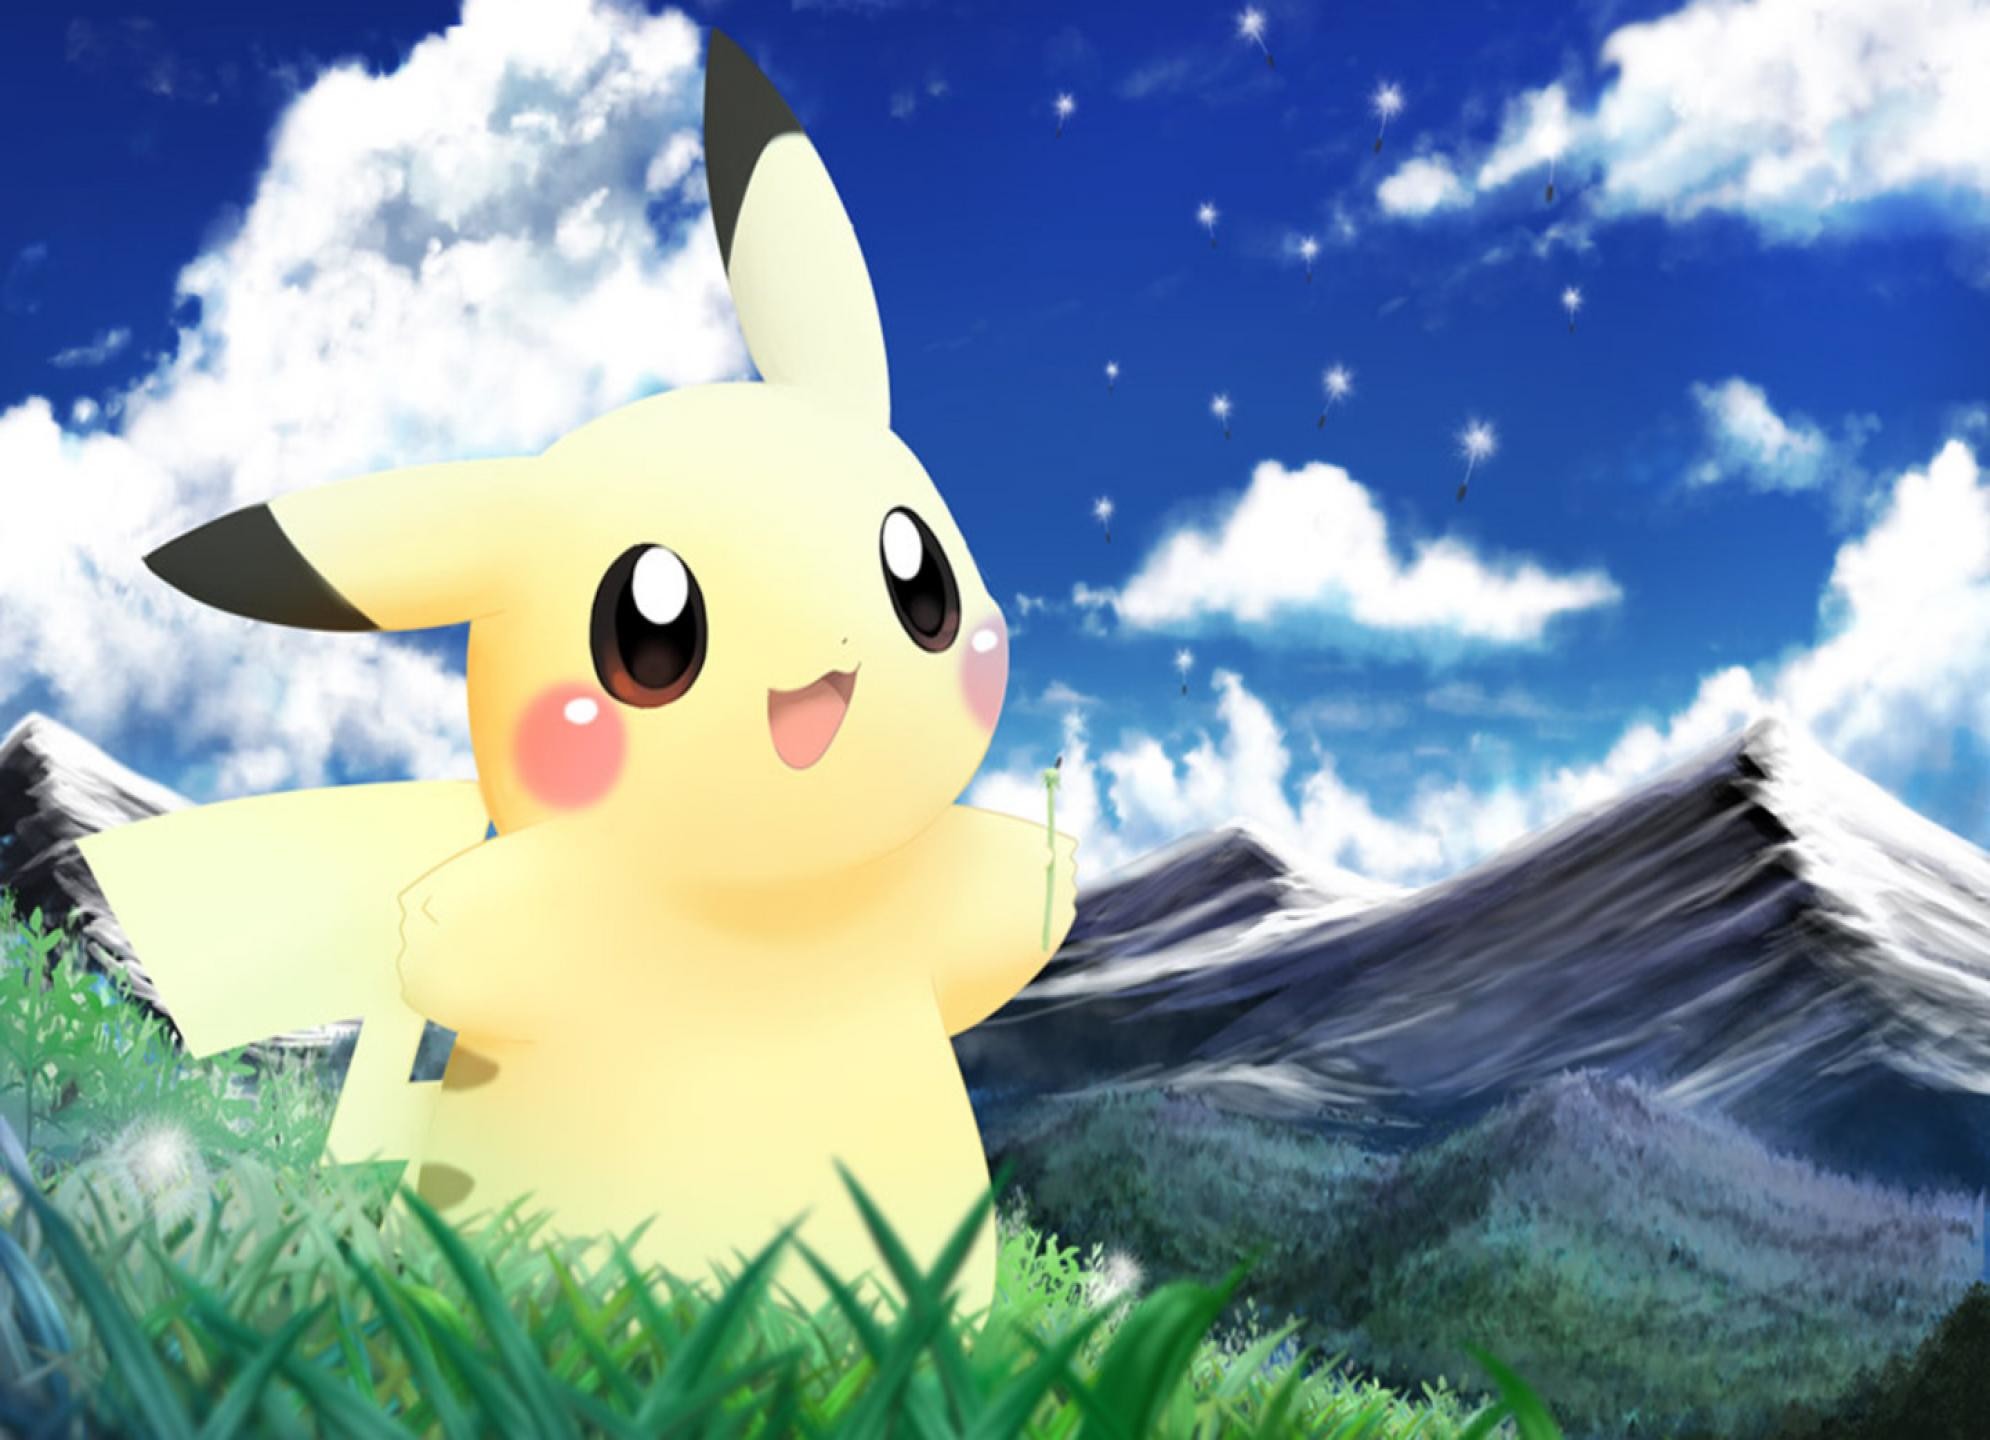 1990x1440 HD Wallpaper and background photos of Pikachu Wallpaper for fans of Pikachu  images.